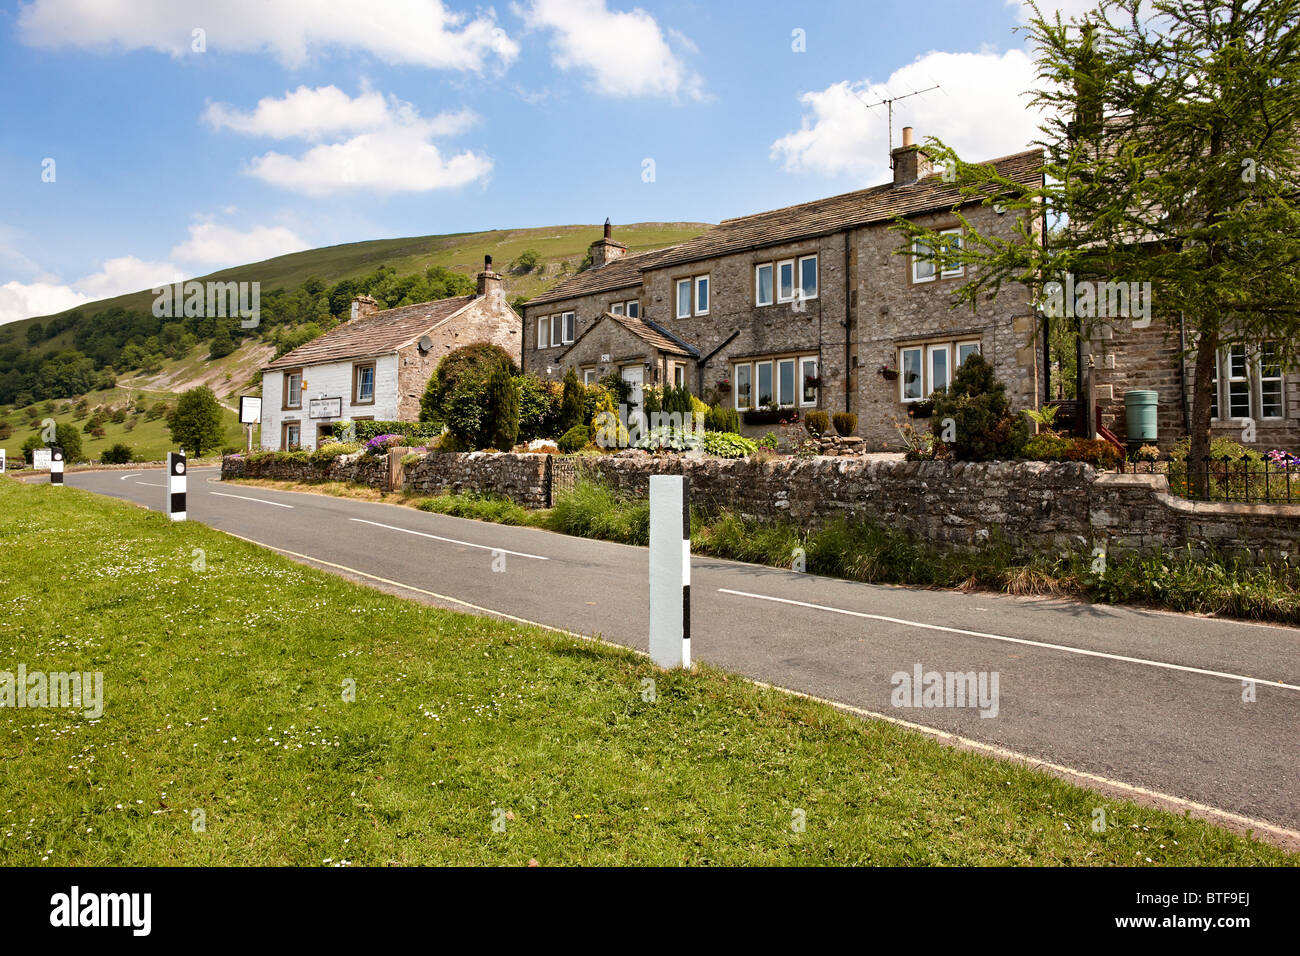 Village shop and cottages in Buckden, Yorkshire Dales, UK Stock Photo